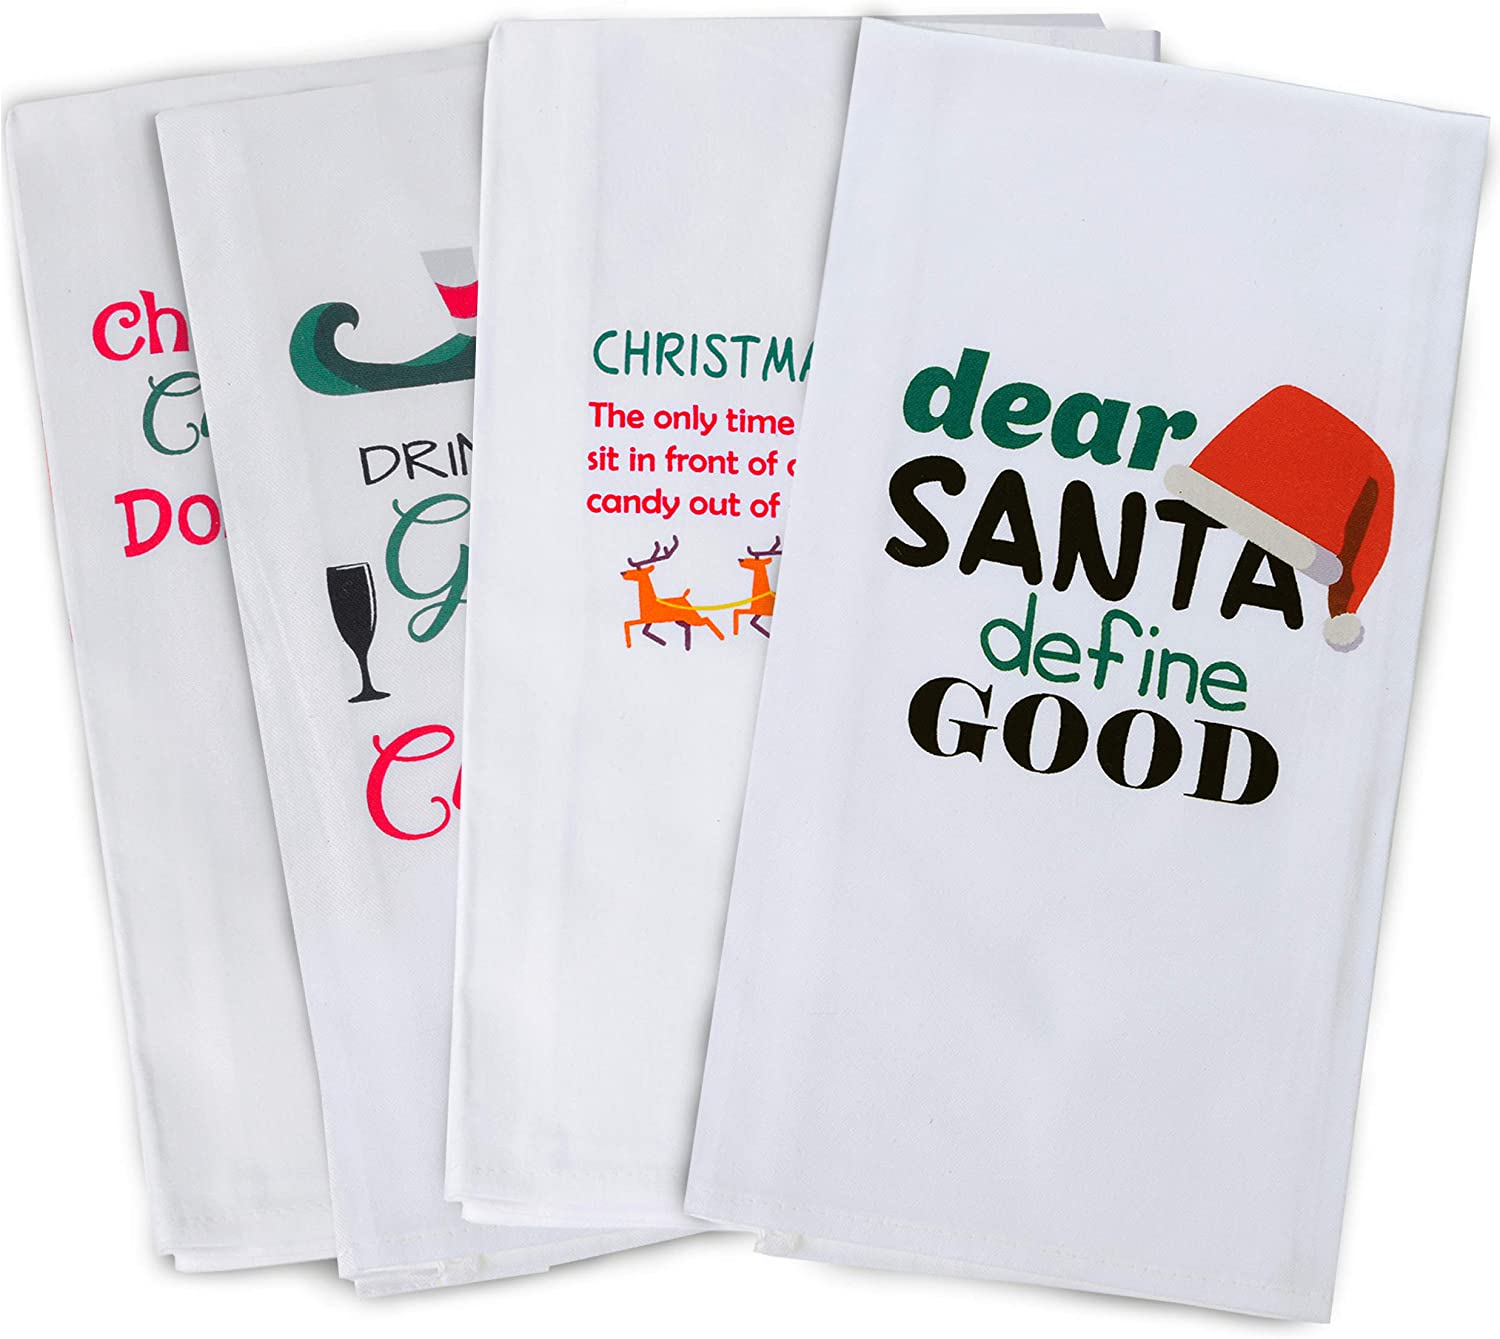  Kitcha Funny Kitchen Towels and Dishcloths Sets of 4, Unique  Funny Dish Towels with Sayings, Perfect for Housewarming Gifts New Home